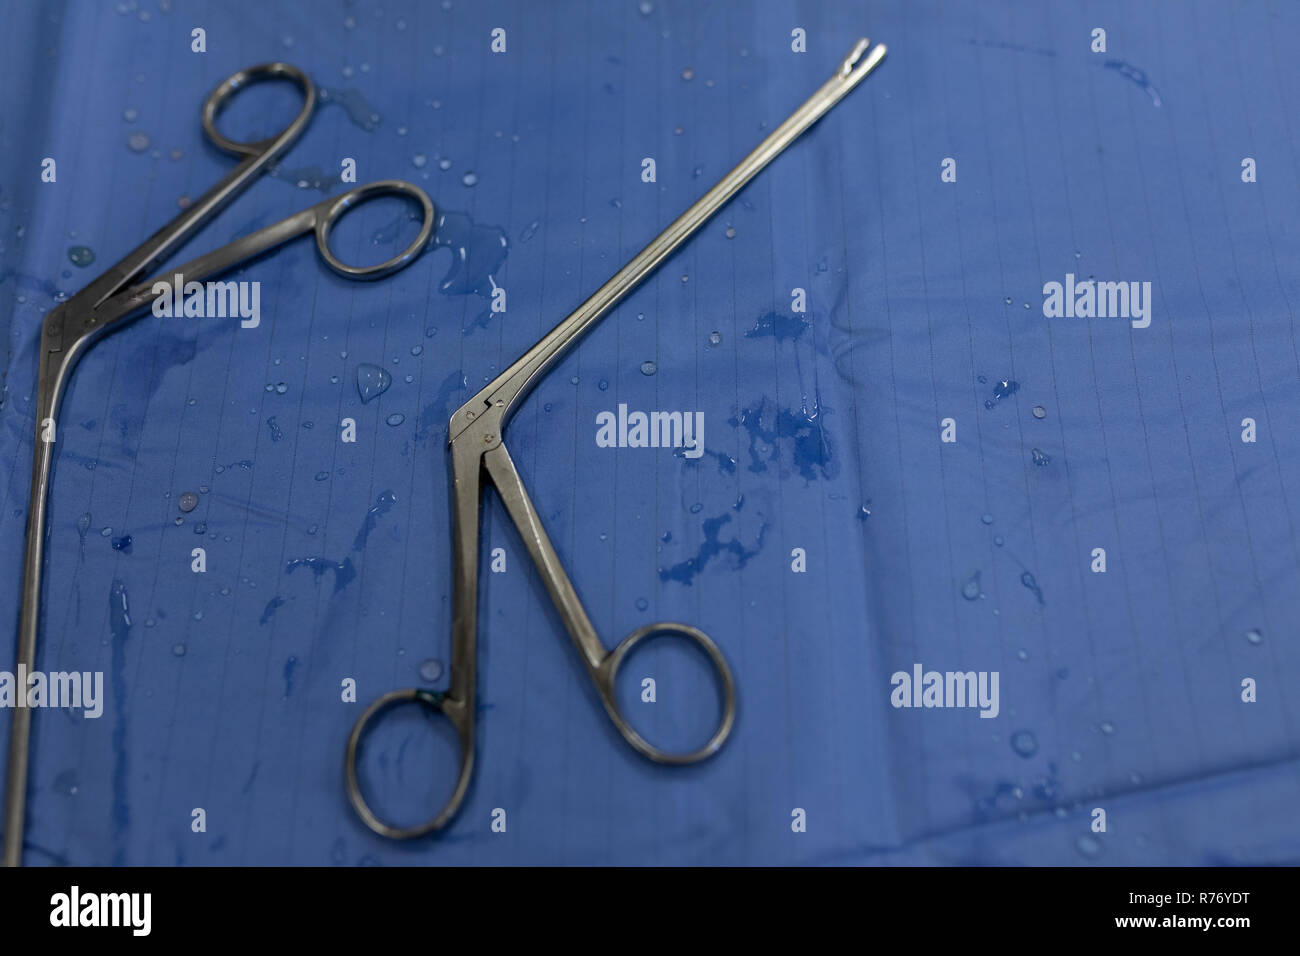 Surgical scissors on a table in hospital Stock Photo